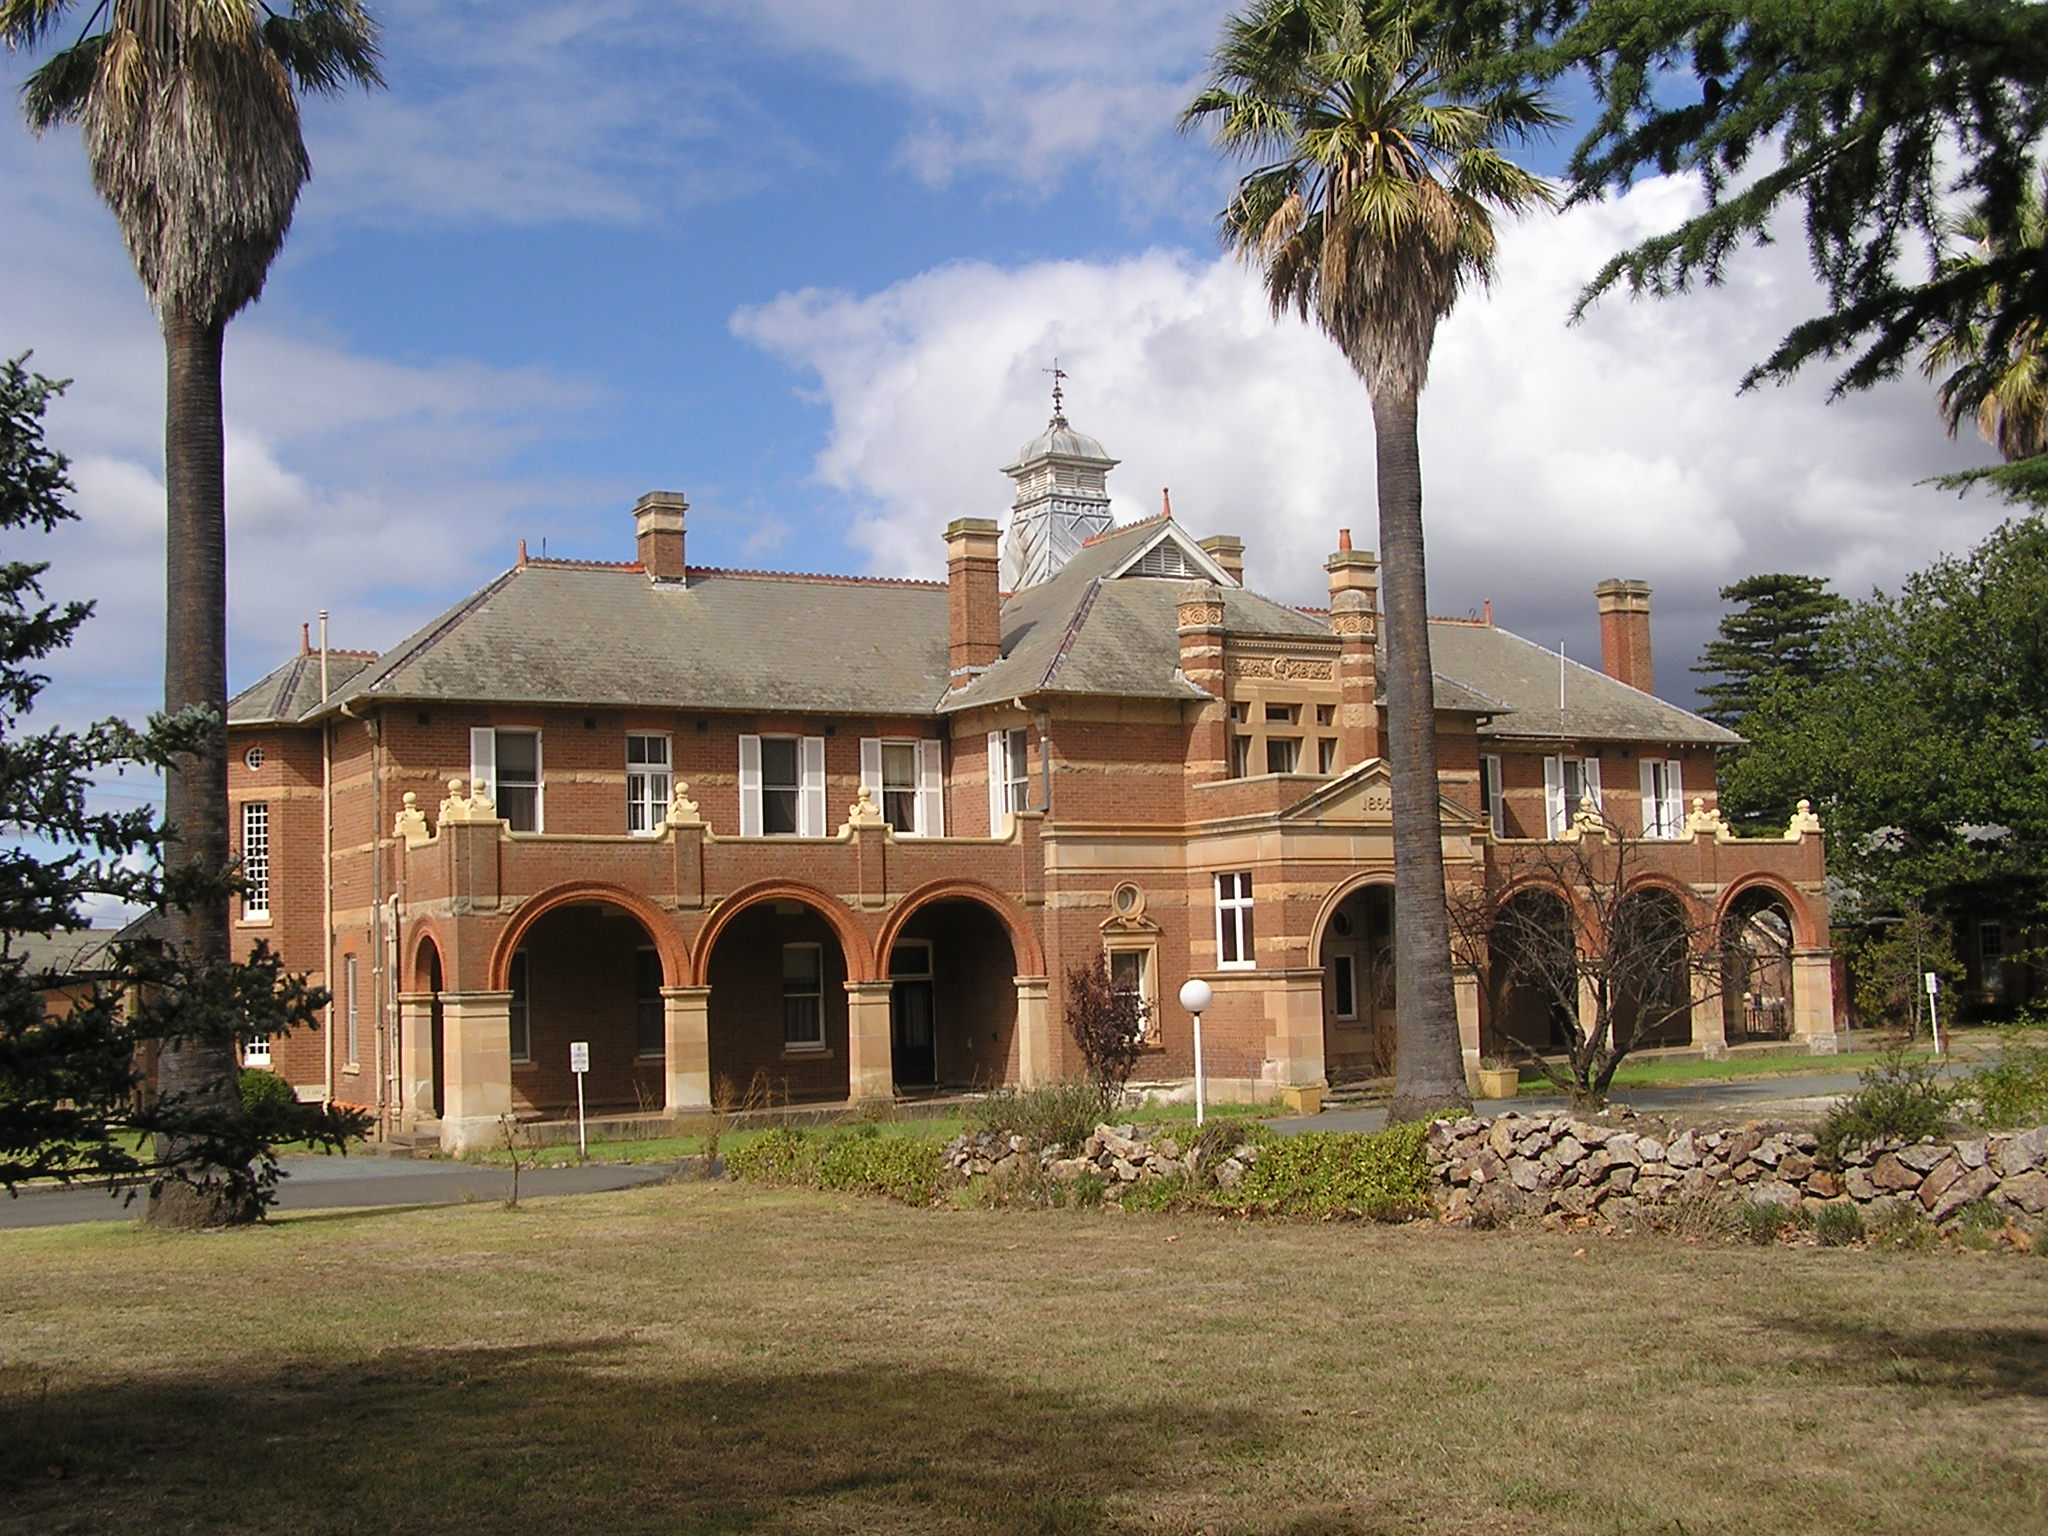 Heritage NSW takes action against Kenmore Hospital owners over 'reprehensible lack of care'